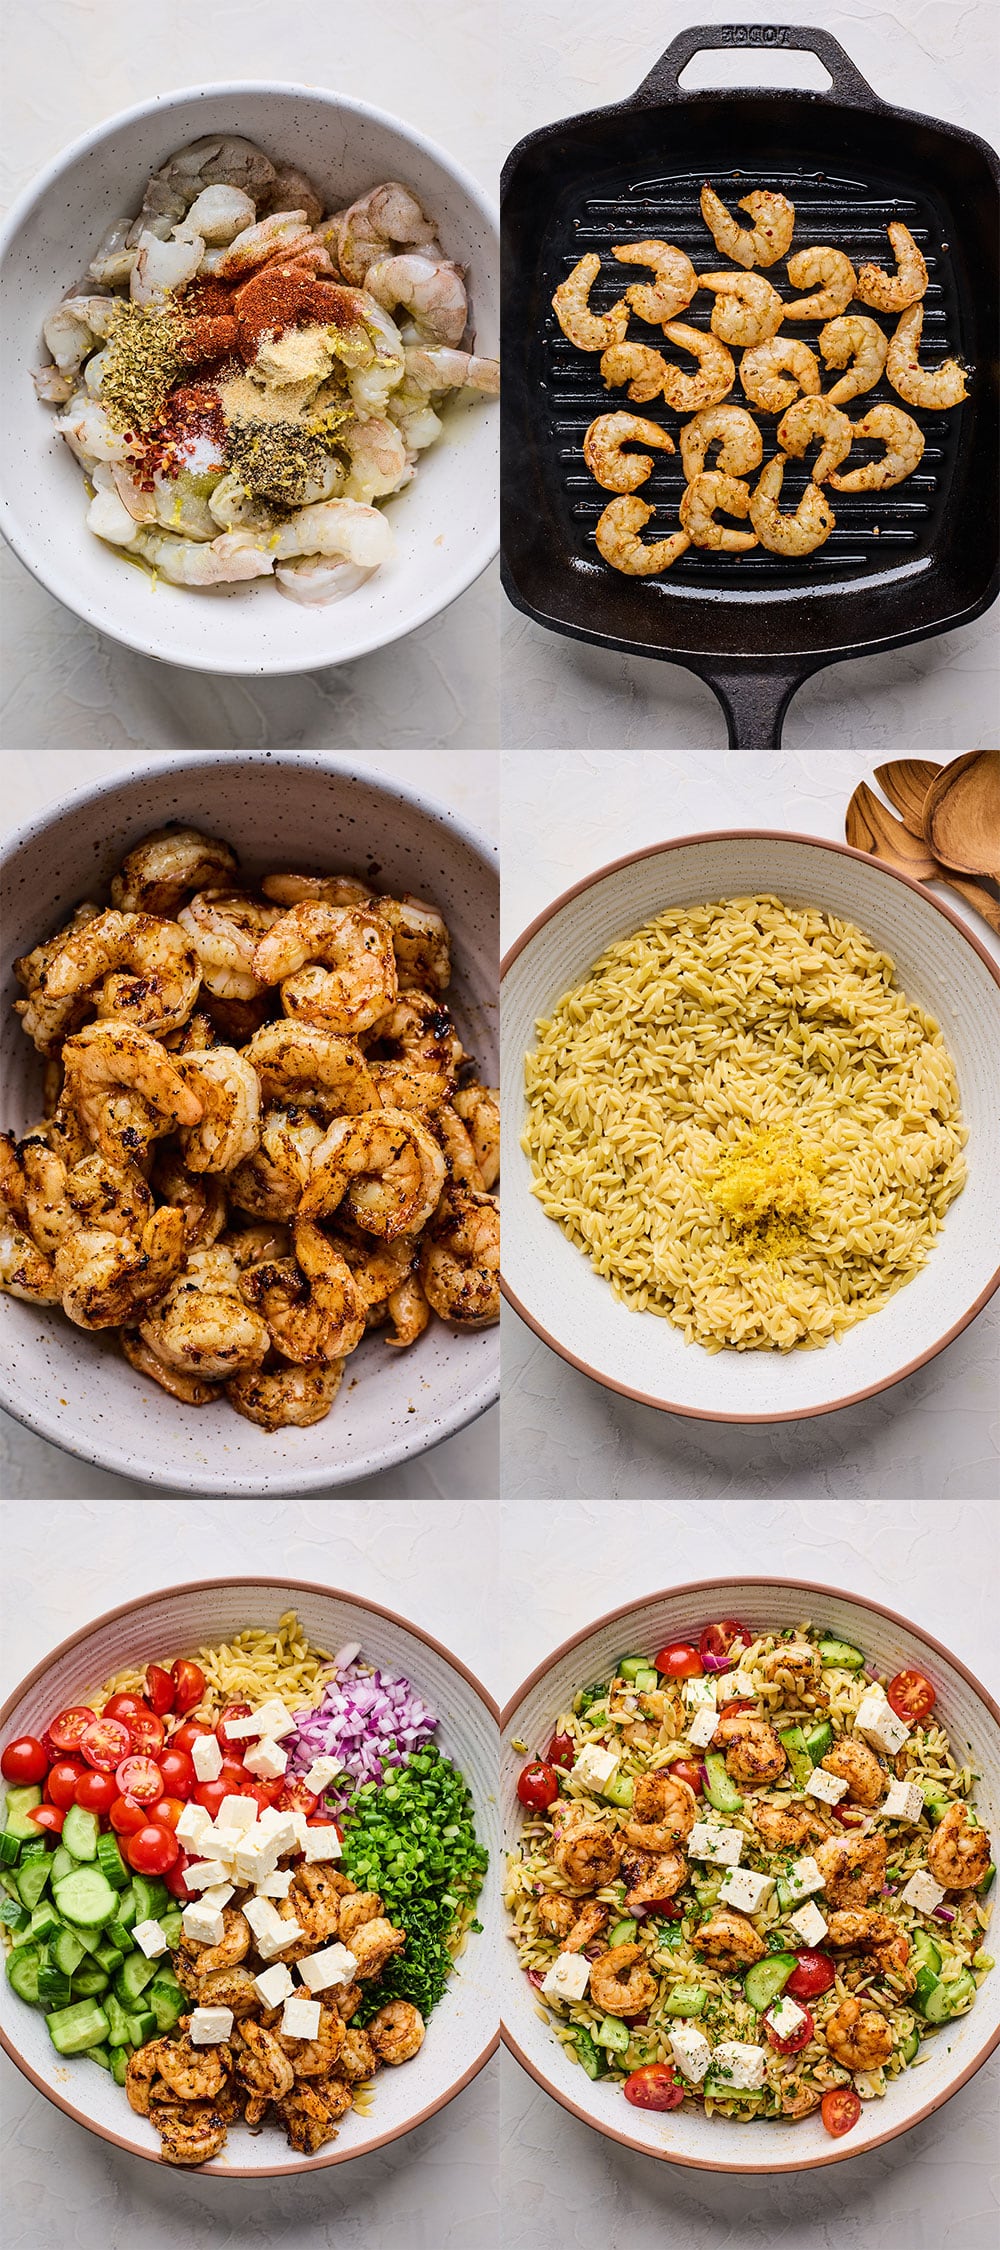 Greek Style Grilled Shrimp Orzo Pasta Salad step by step directions